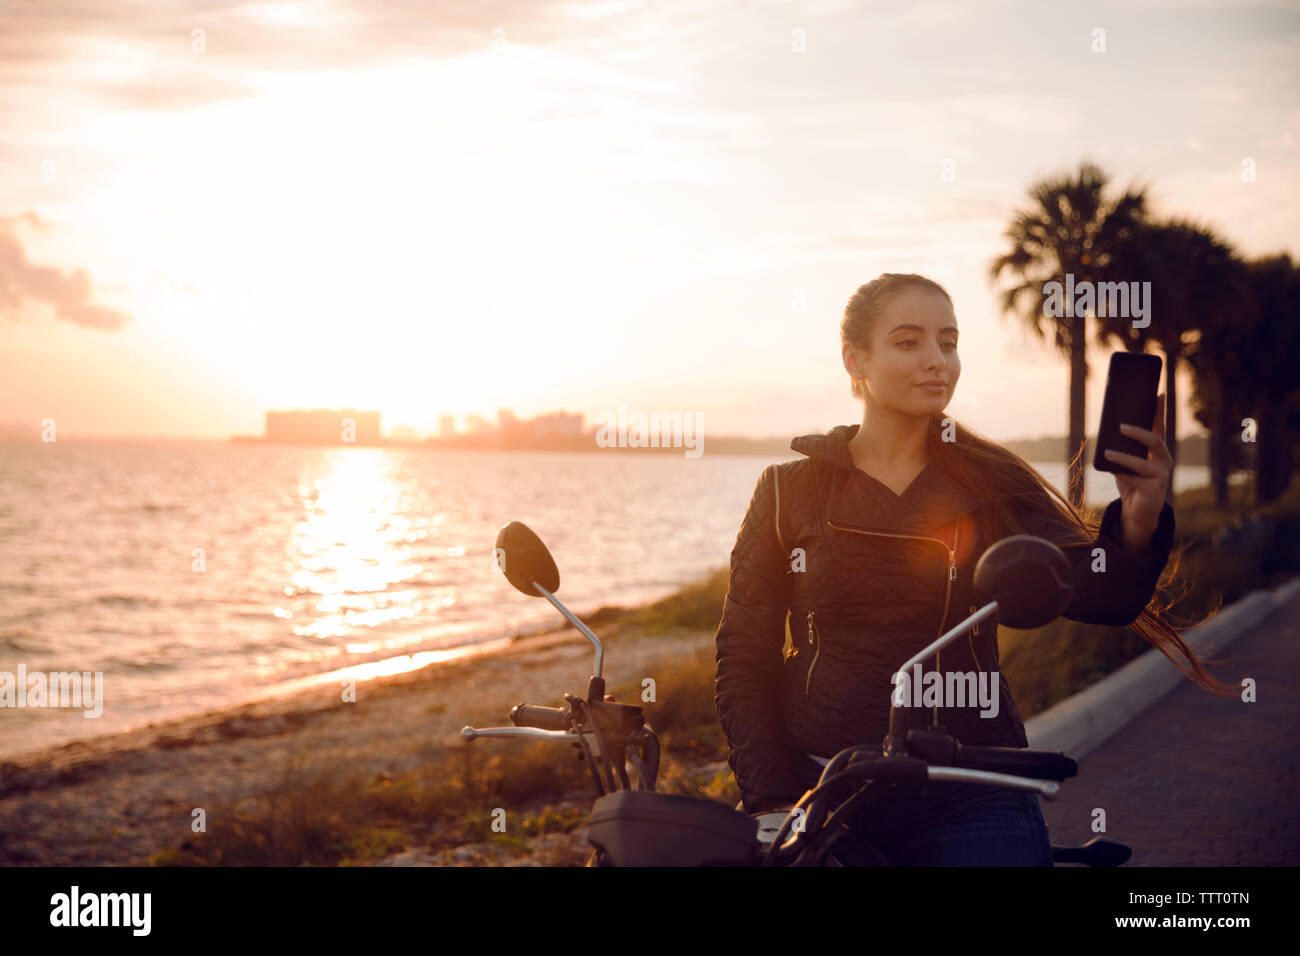 Beautiful woman clicking selfie while sitting on motorcycle during sunset Stock Photo